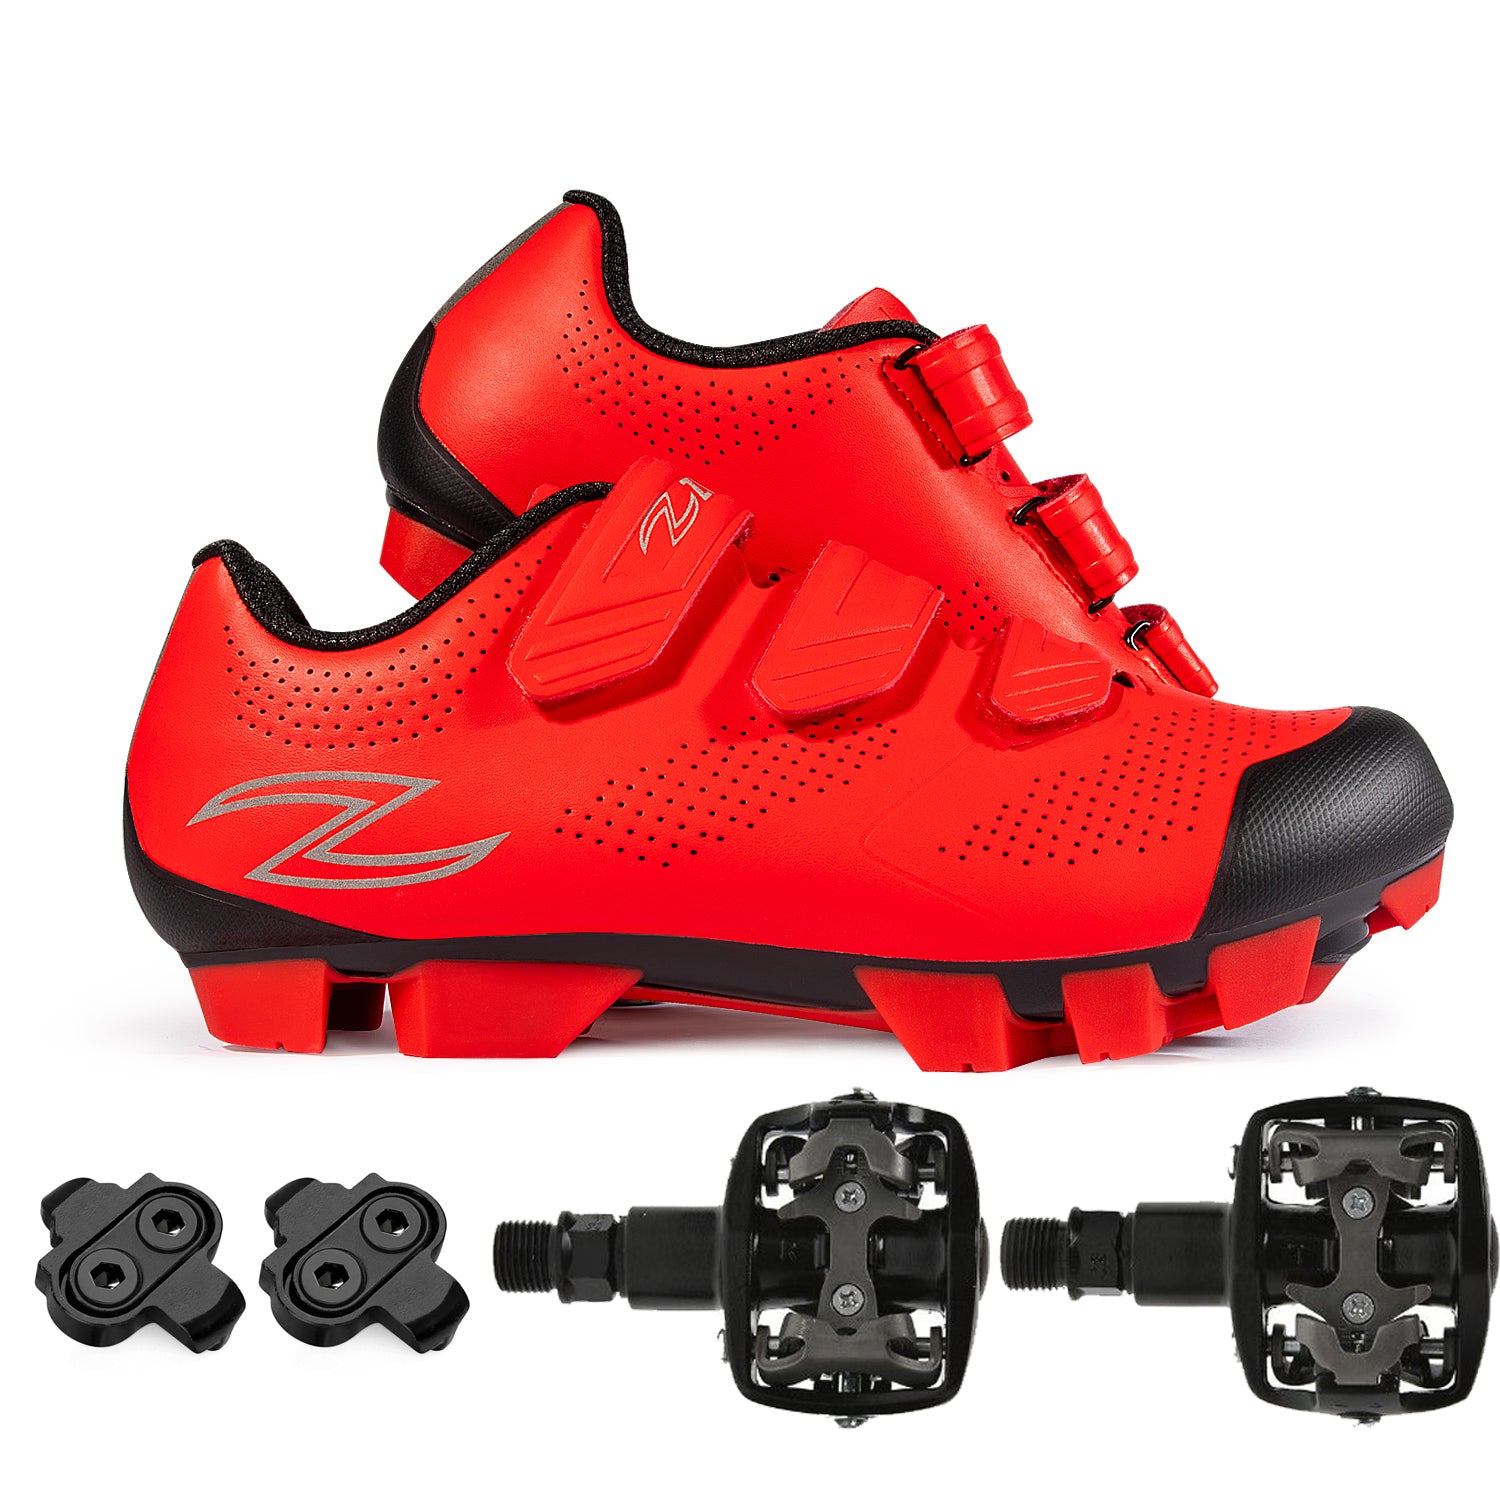 Zol Raptor Mtb and Indoor Cycling Shoes with Pedals and Cleats - Zol Cycling